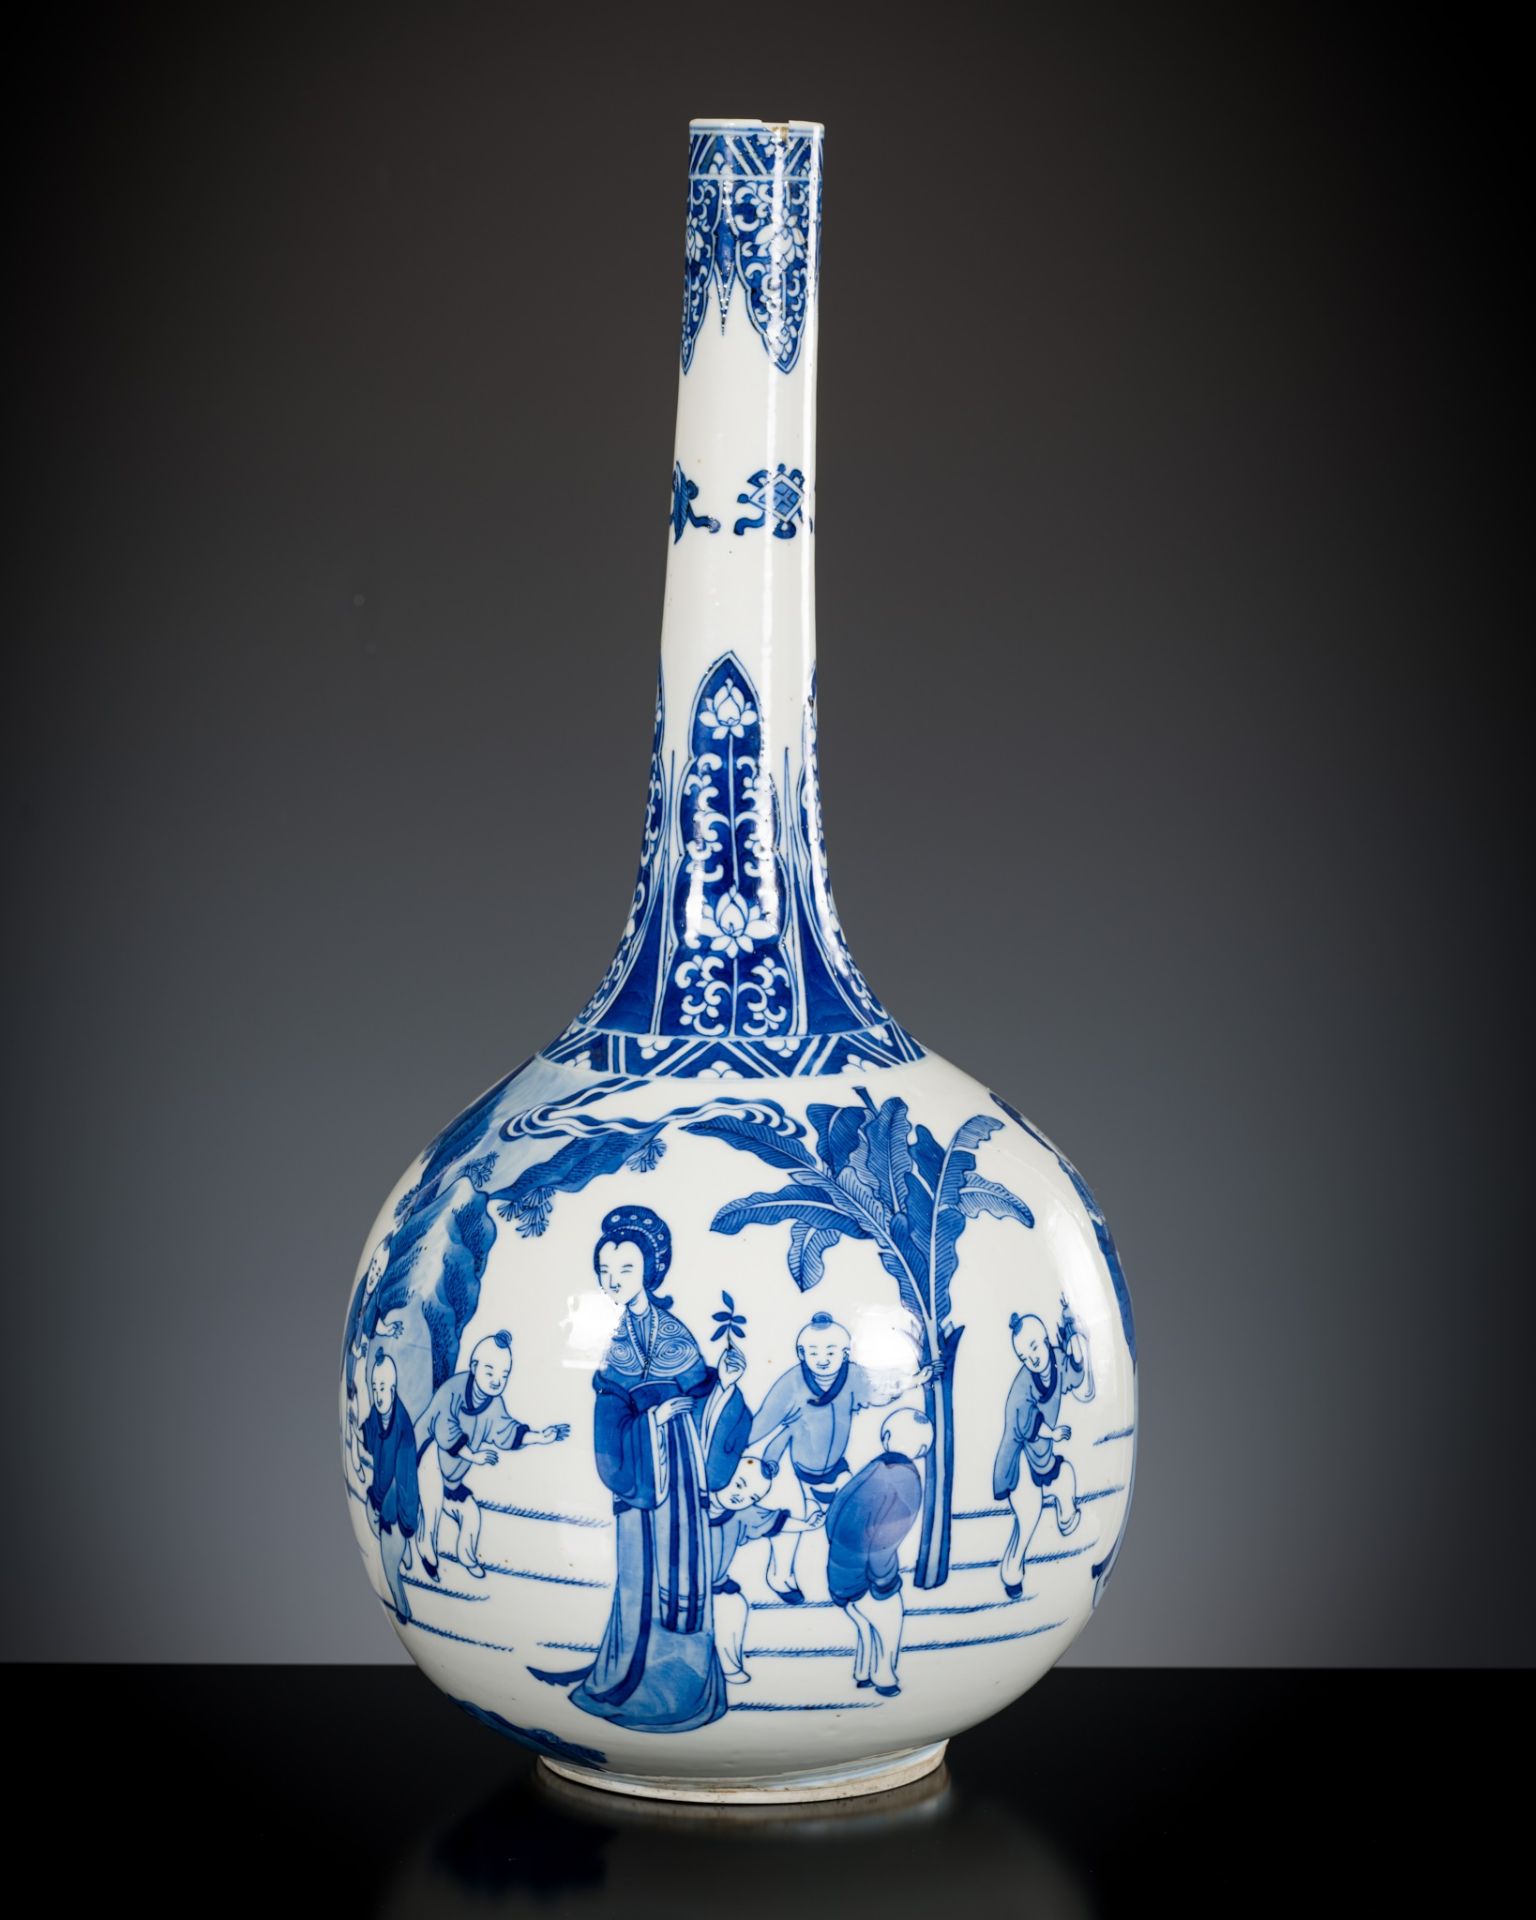 A LARGE BLUE AND WHITE 'PLAYING DISCIPLES' BOTTLE VASE, CHINA, 18th - 19th CENTURY